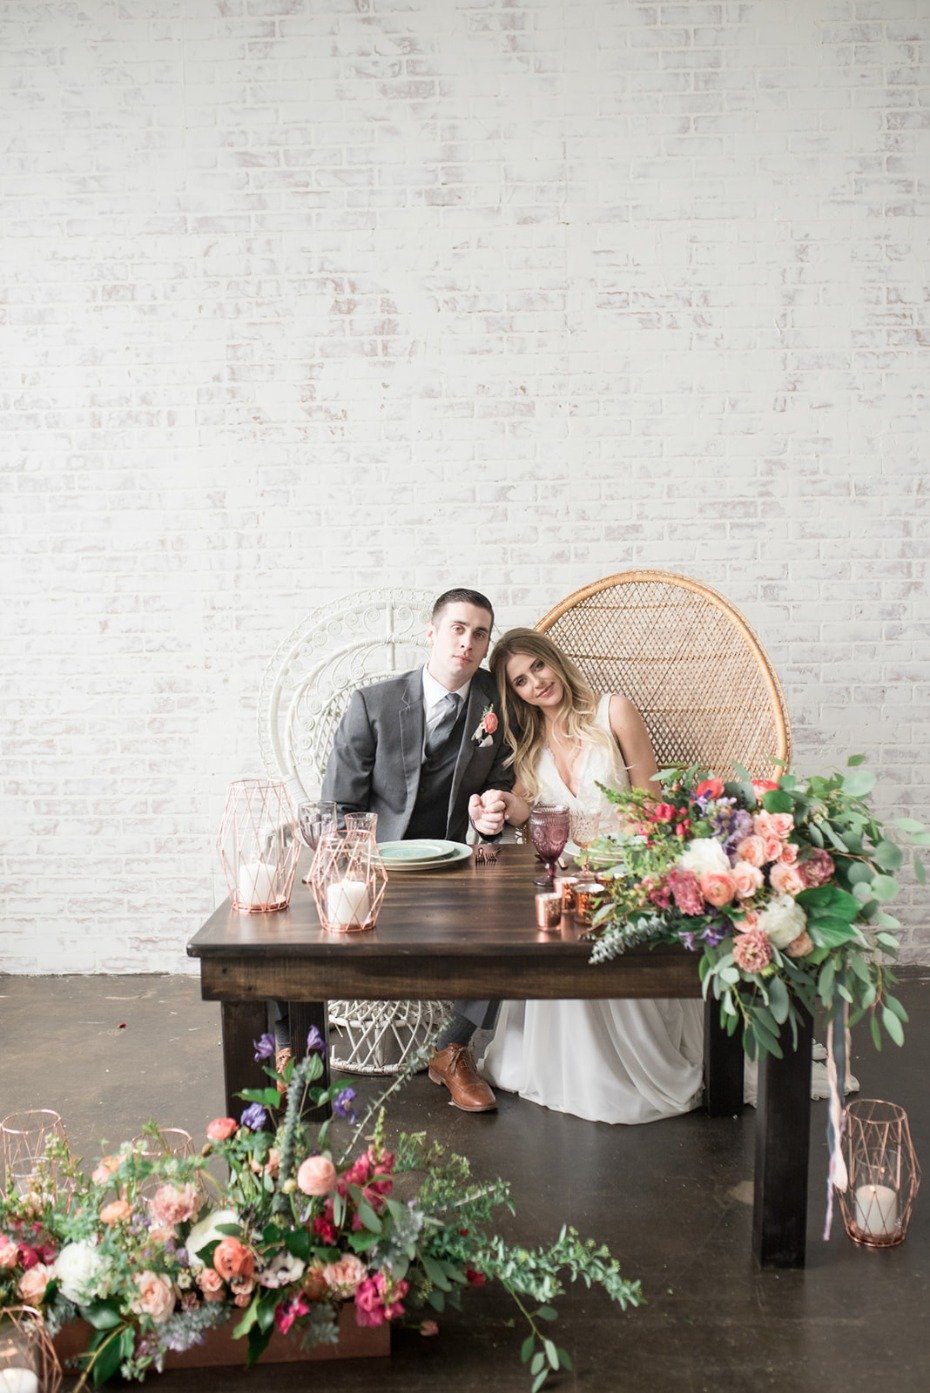 Bohemian sweetheart table with peacock chairs